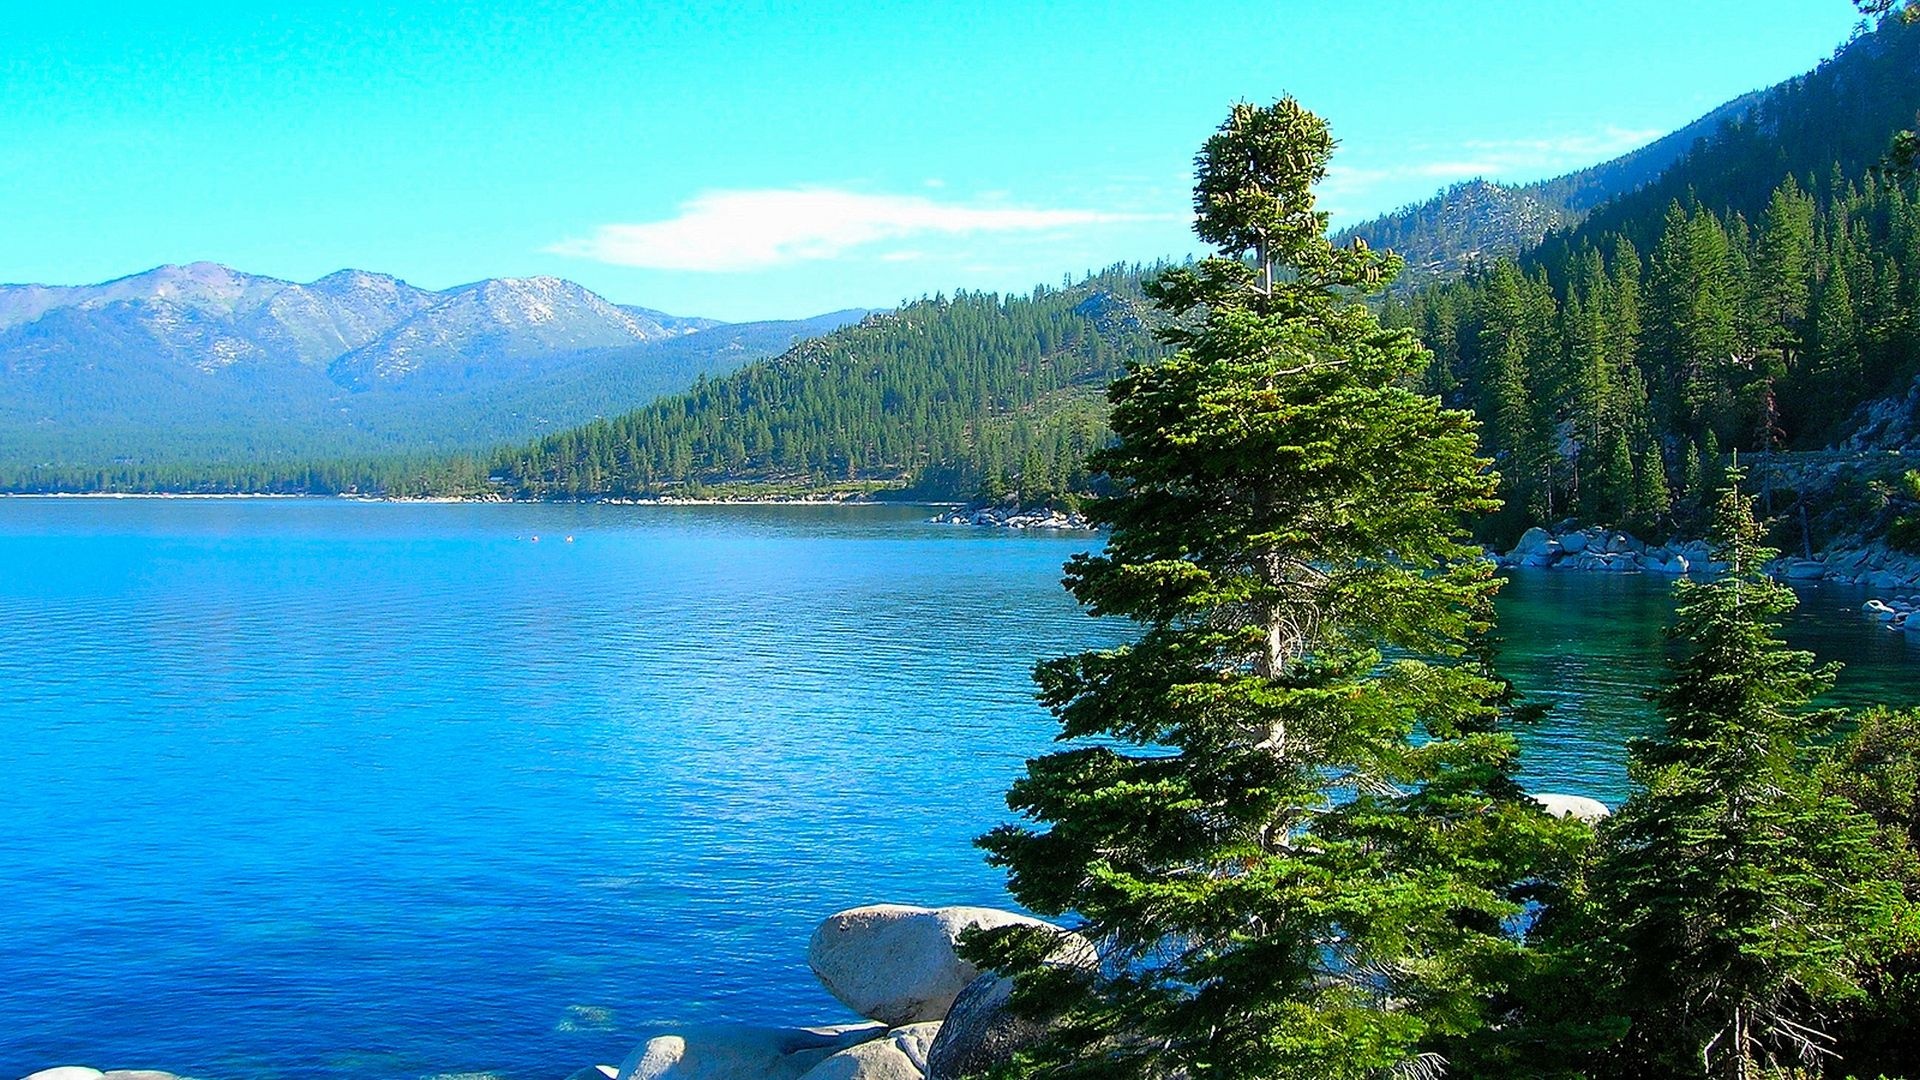 Lake Tahoe wallpapers, Stunning visuals, Nature's beauty, Captivating backgrounds, 1920x1080 Full HD Desktop